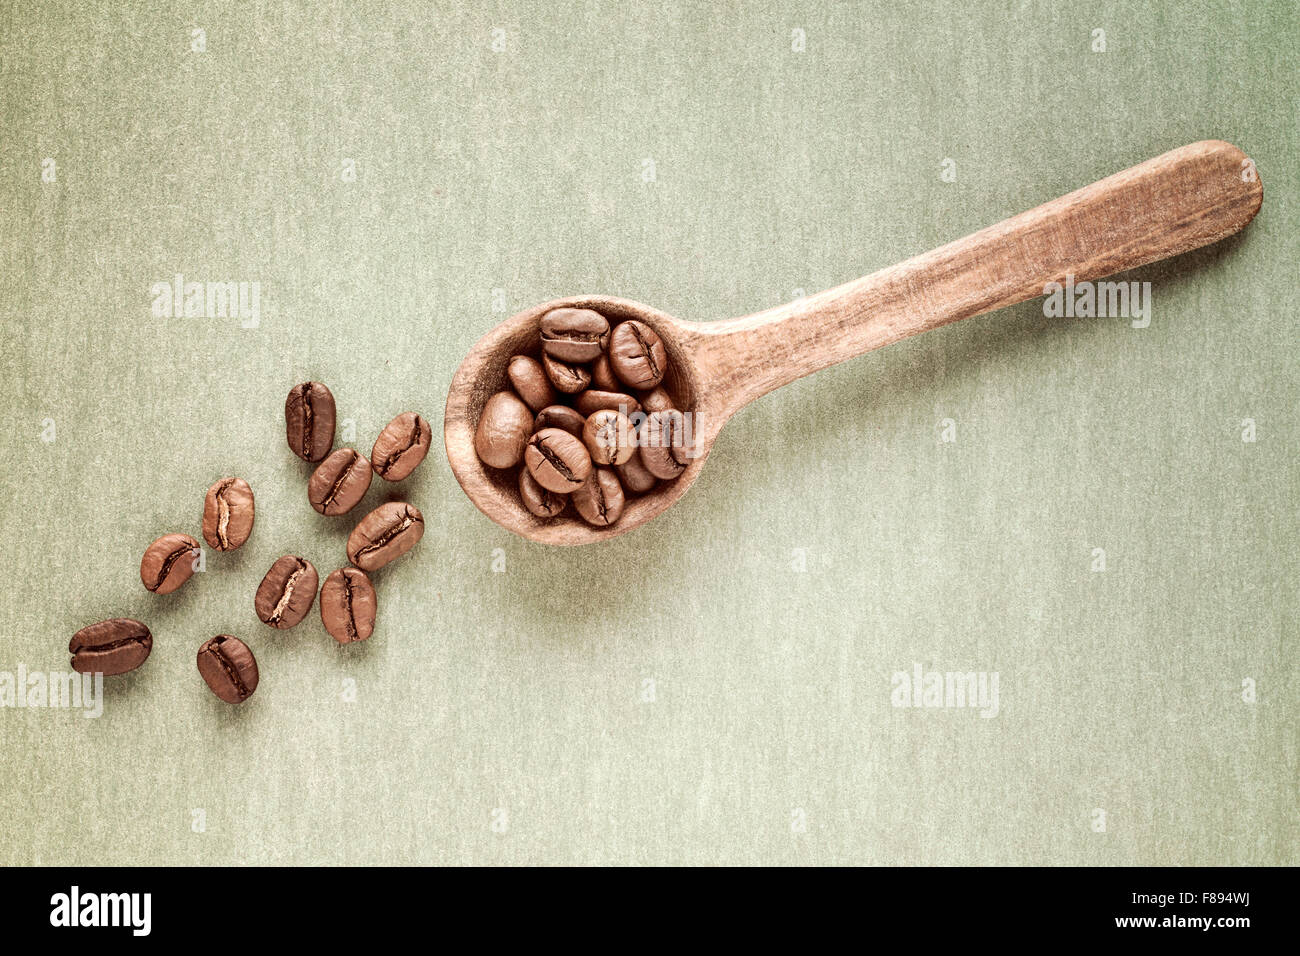 Spoon with coffee crop beans on paper background Stock Photo